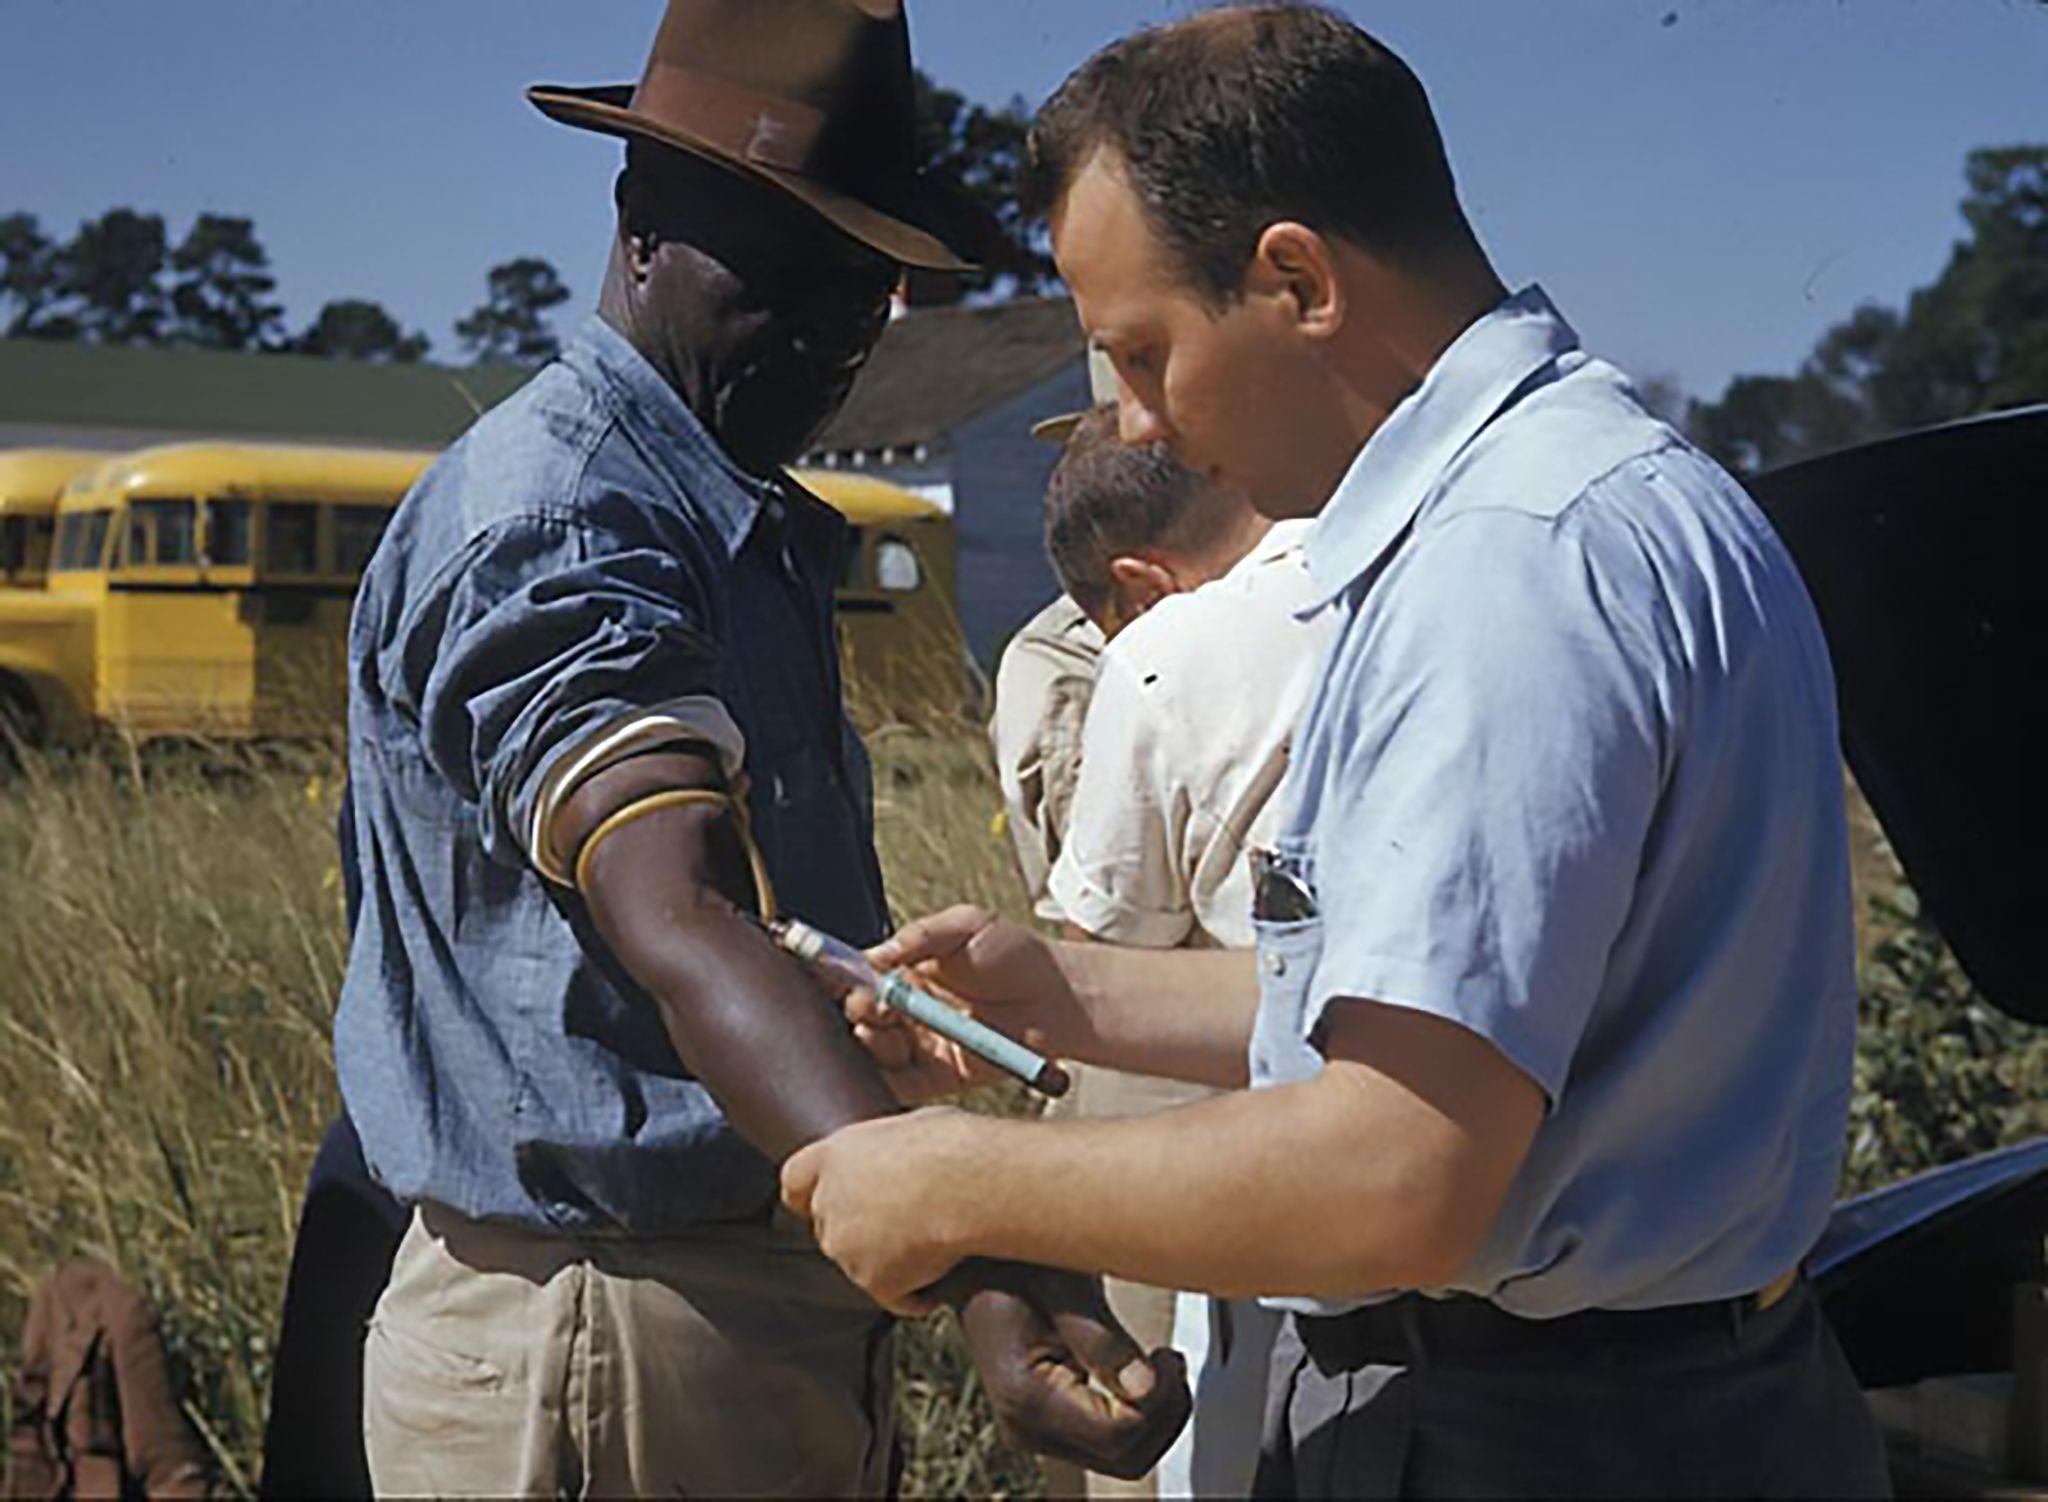 A white man administers an injection to an African American man standing outside in a field.